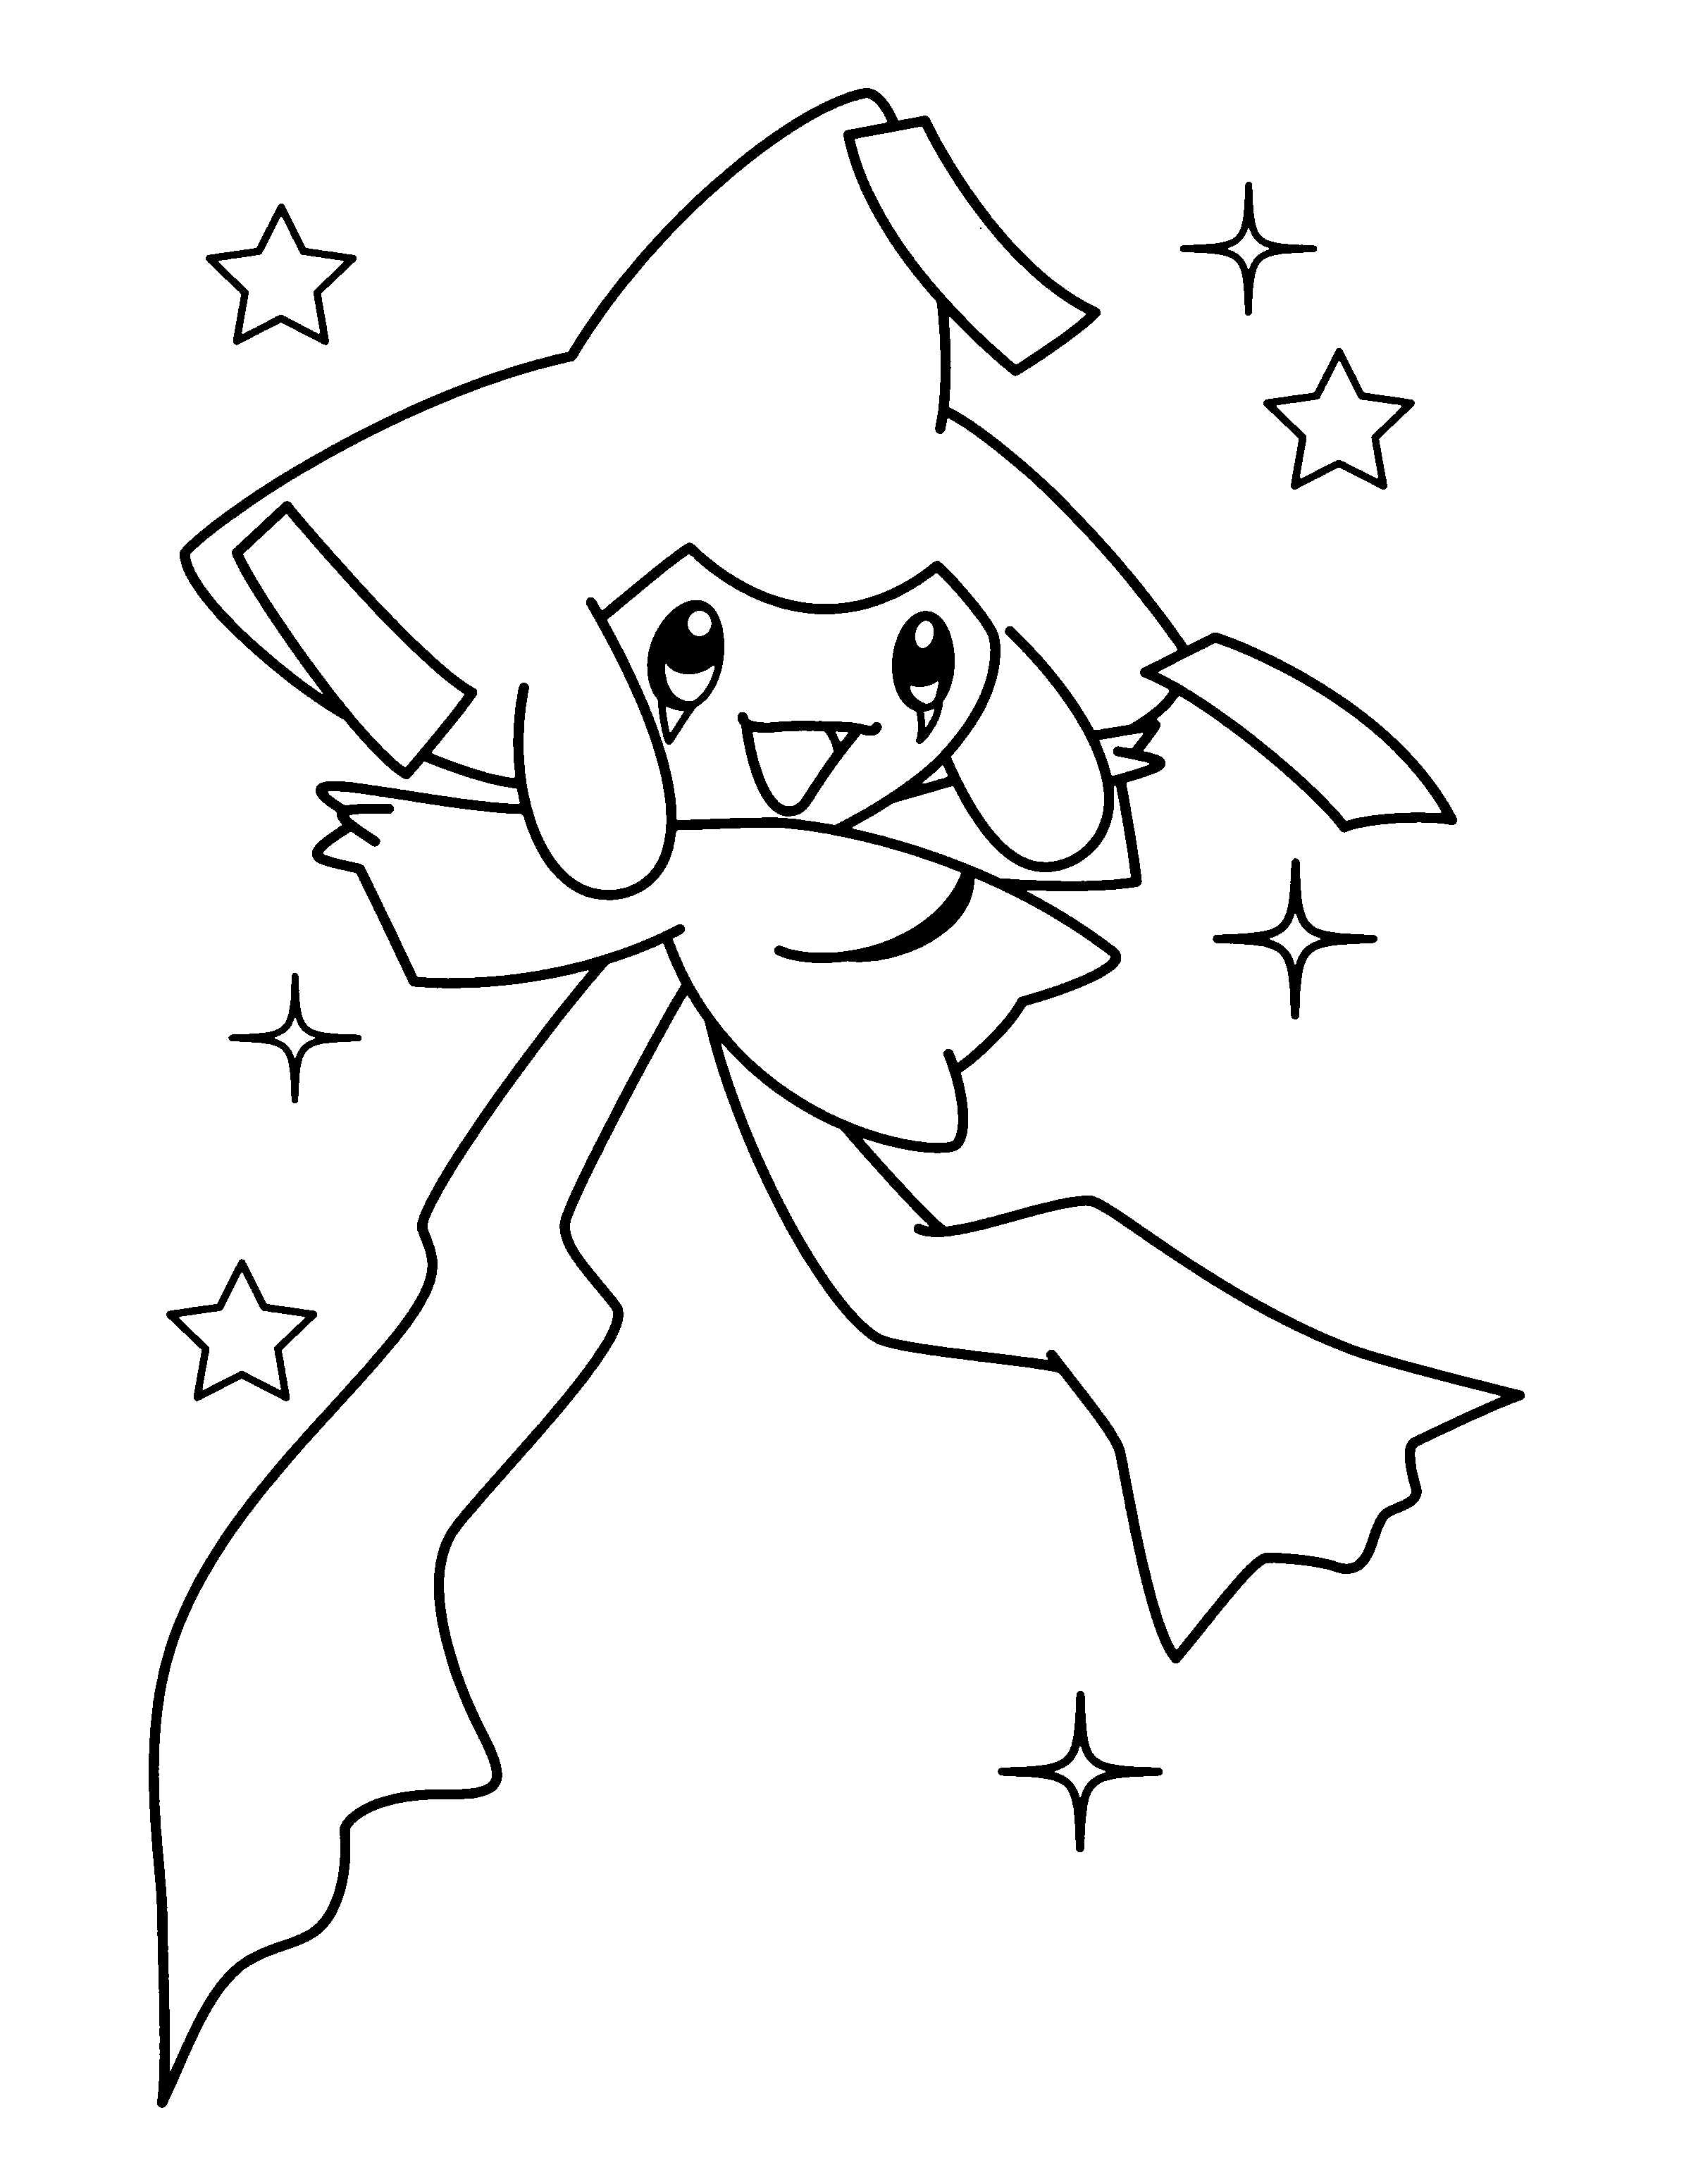 animated-coloring-pages-pokemon-image-0960